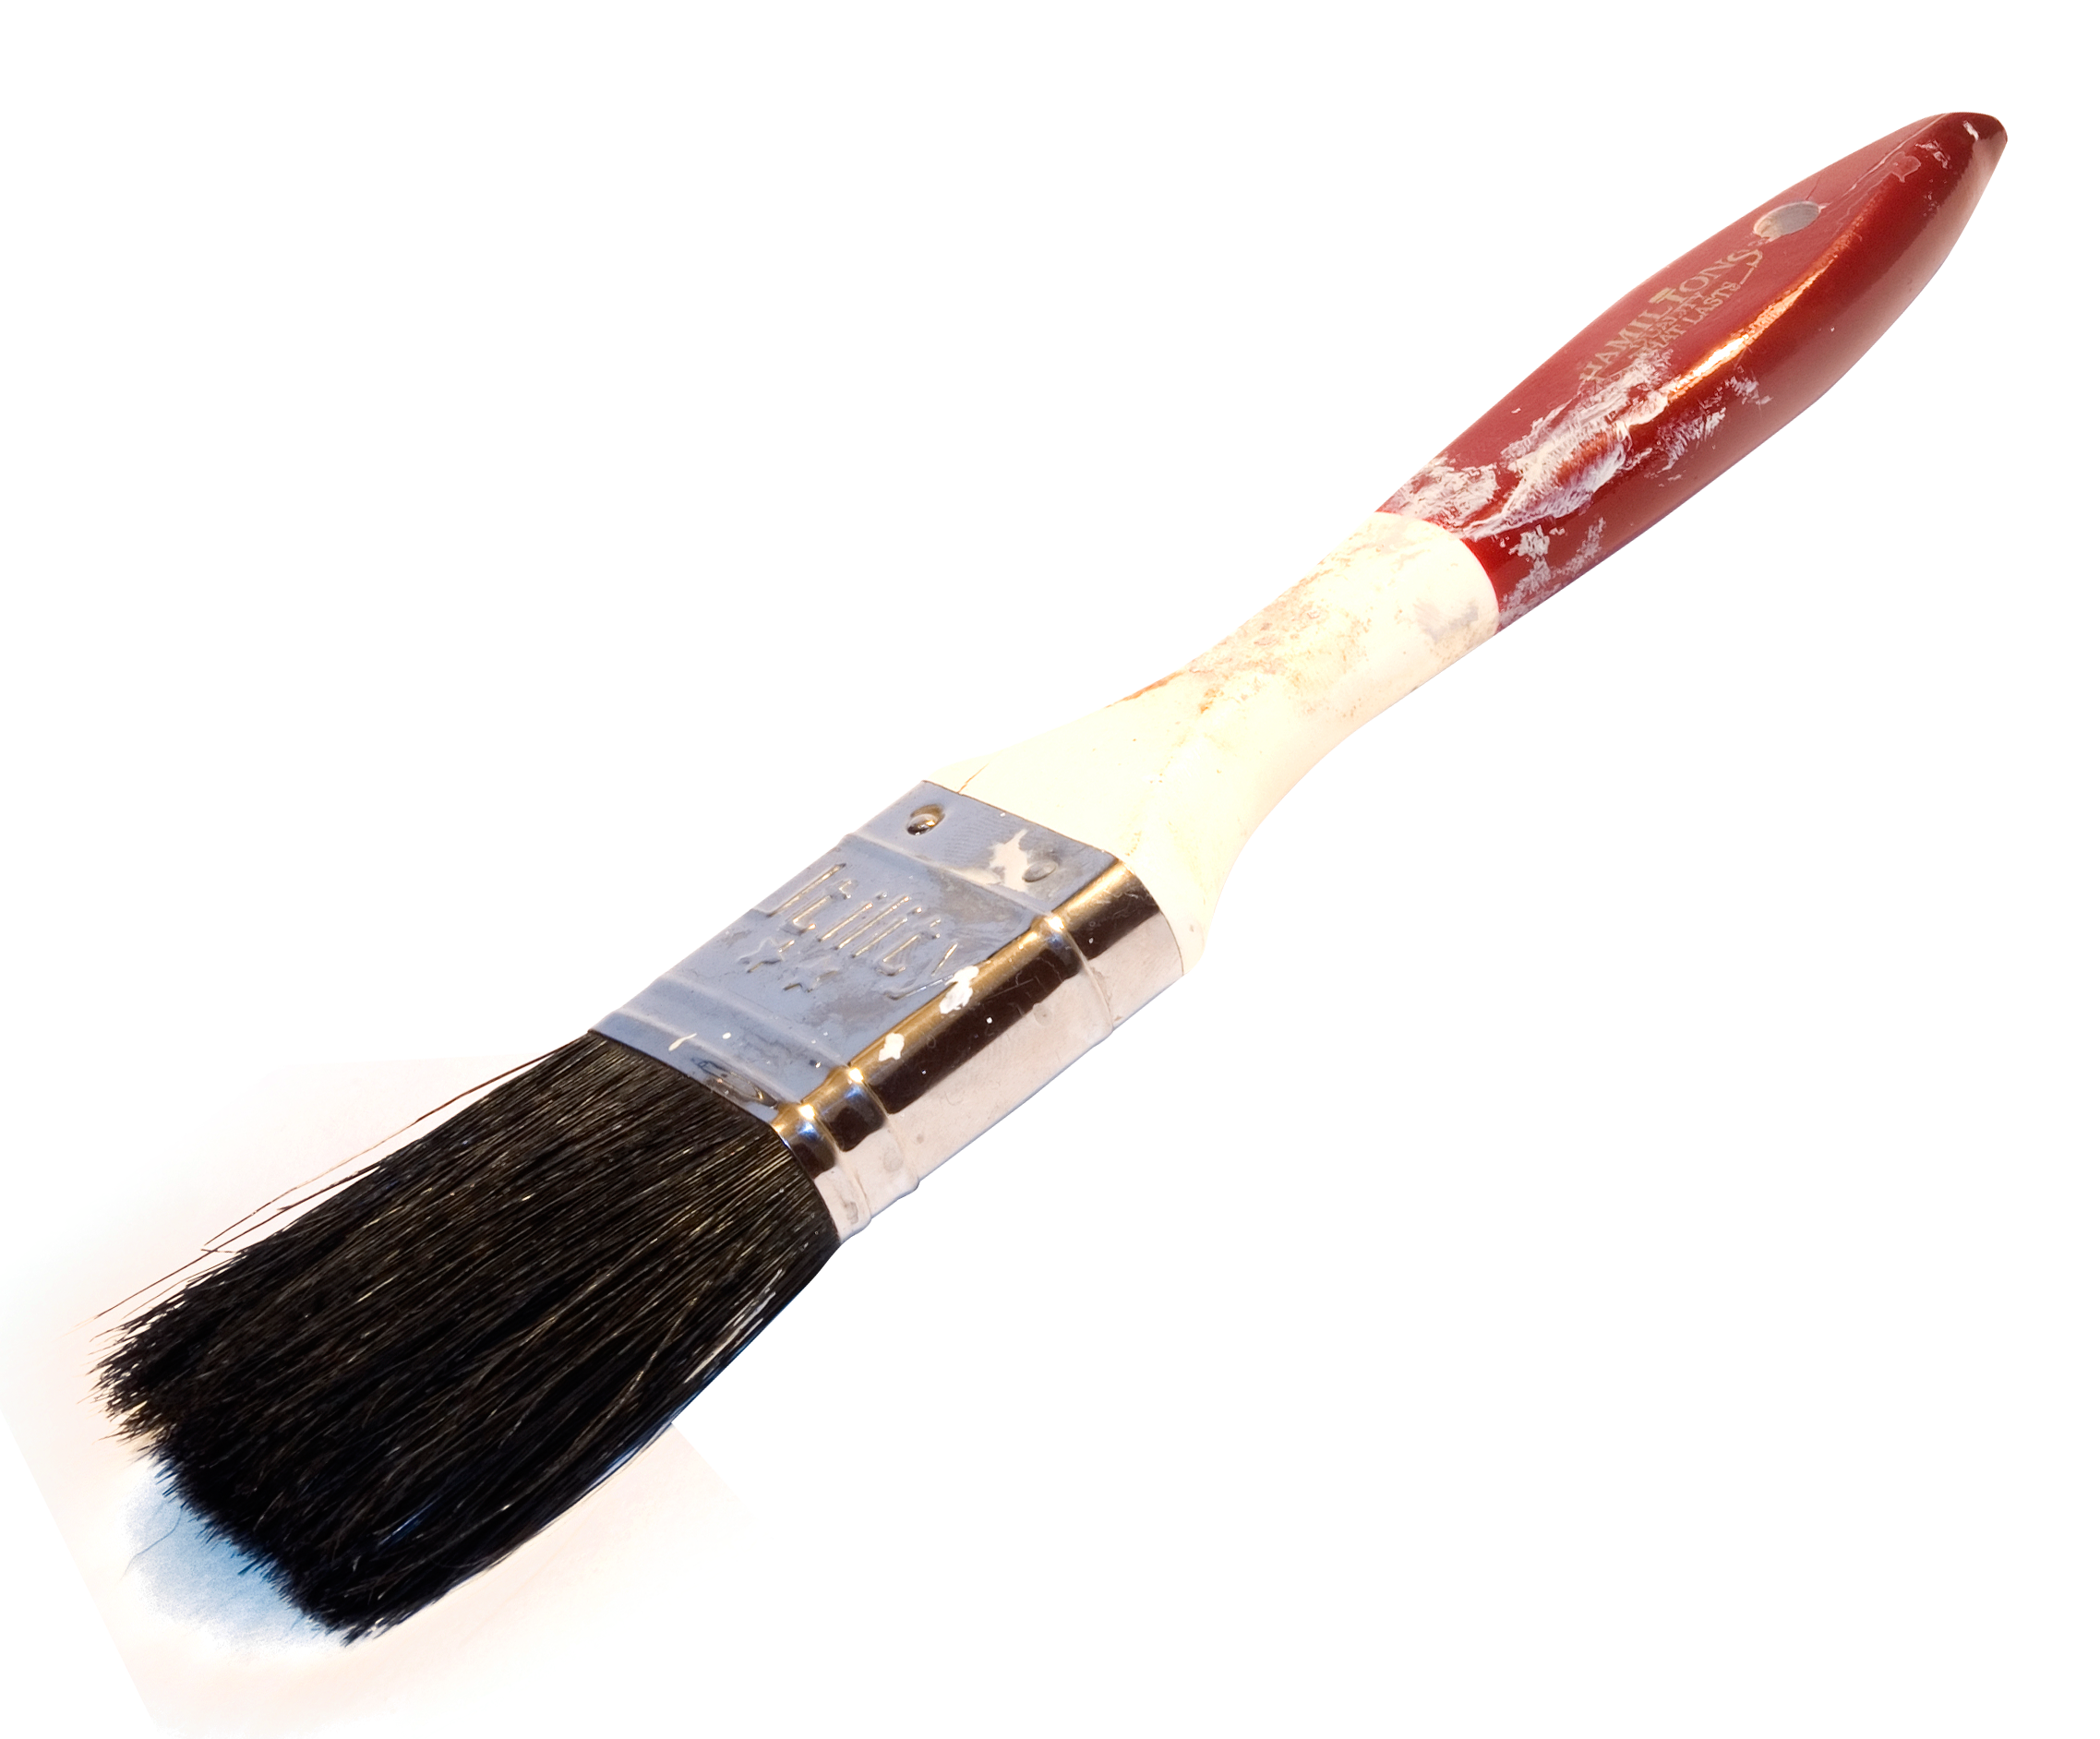 A Paint Brush With A Red Handle